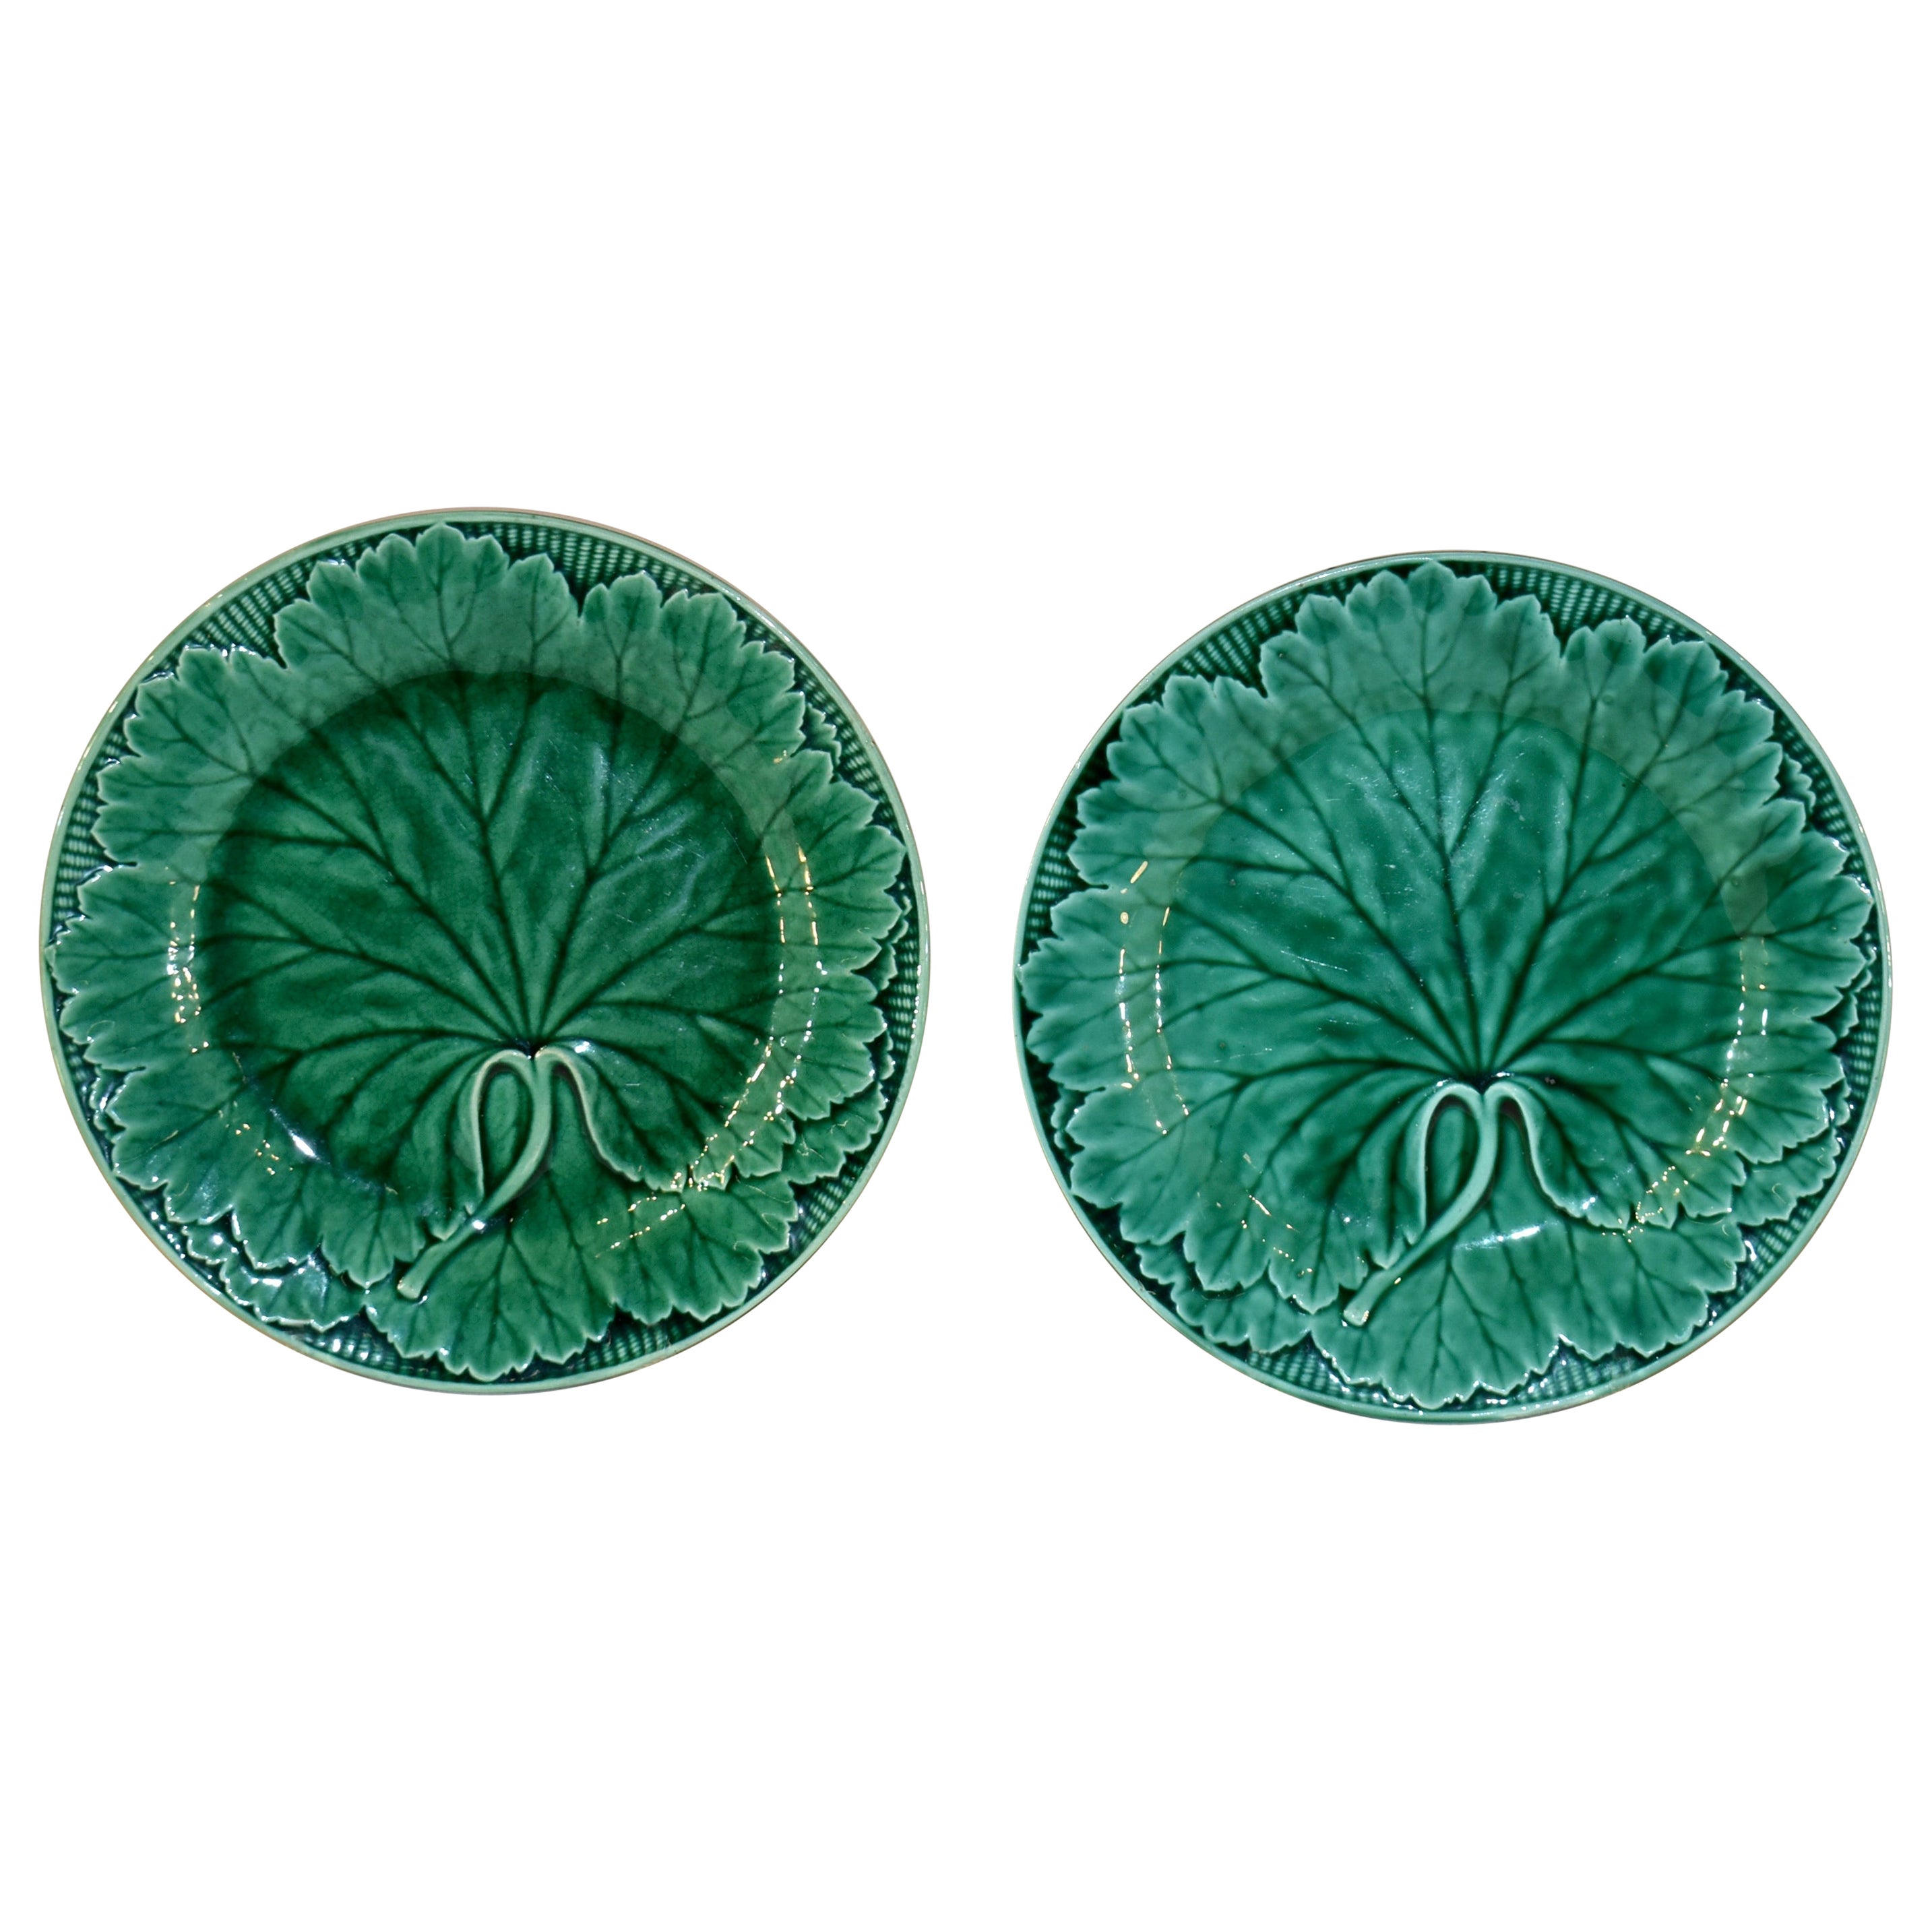 Pair of 19th Century Wedgwood Majolica Plates For Sale